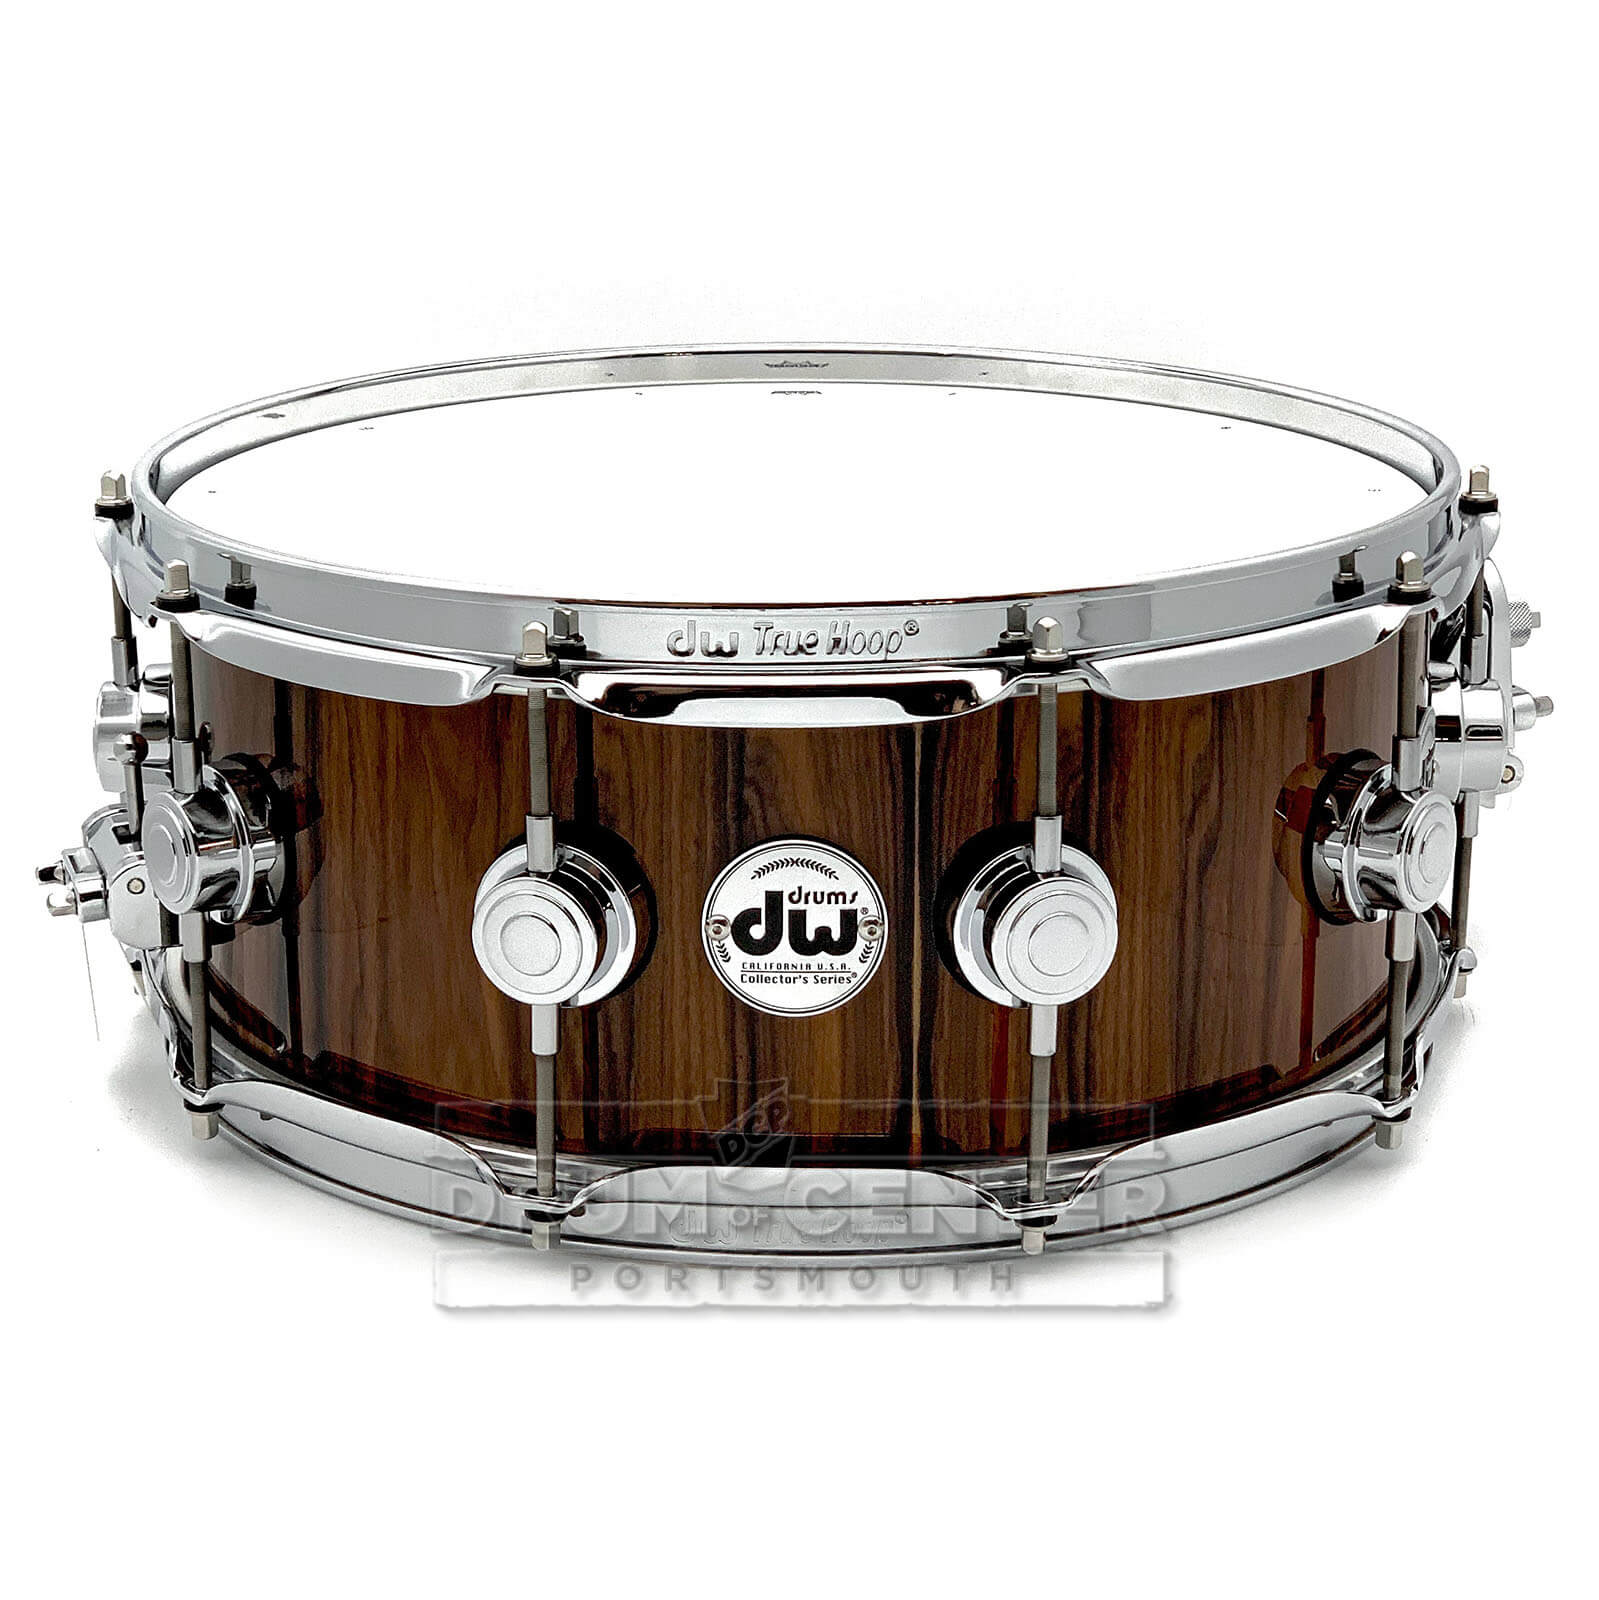 DW Collectors SSC Maple Snare Drum 14x5.5 Exotic Santos Rosewood